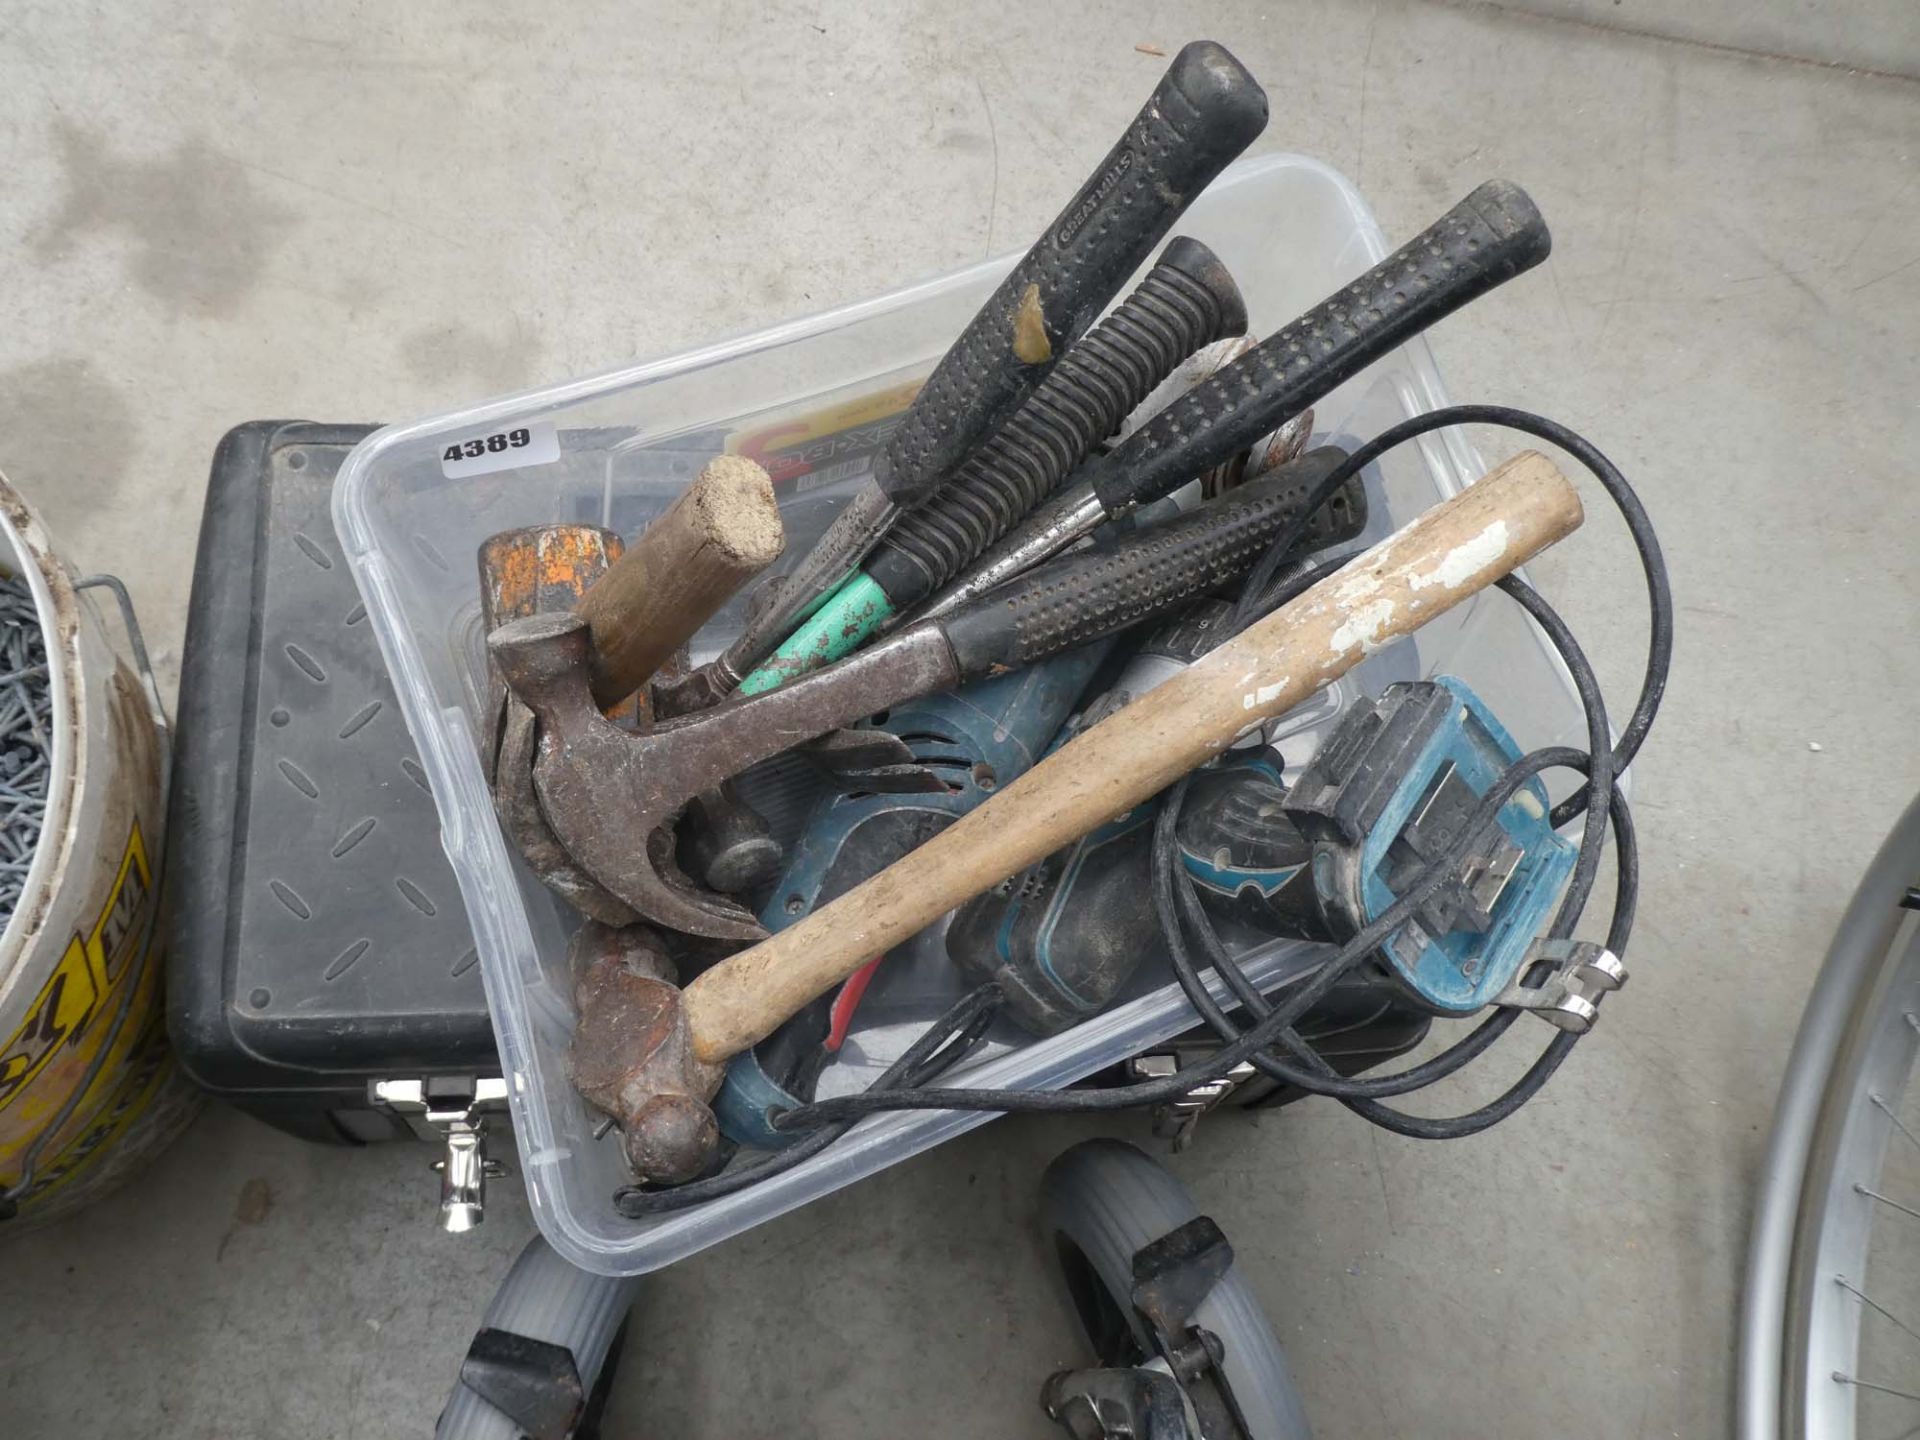 Toolbox containing tools and a small plastic crate containing hammers, drill bodies, angle